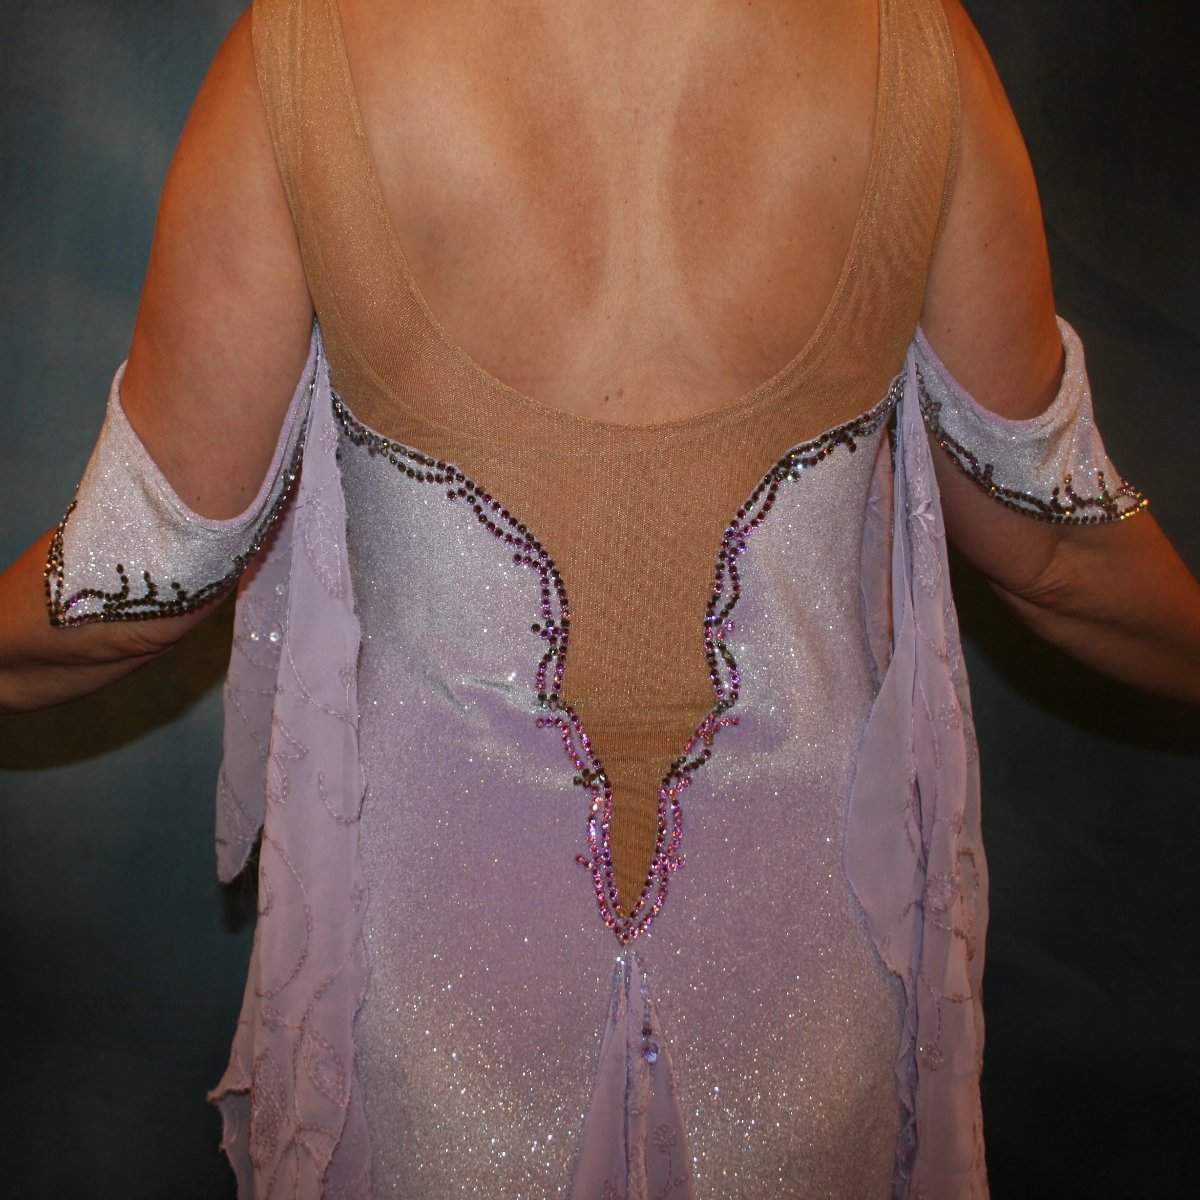 Crystal's Creations close up of back on Orchid ballroom dress created from luxurious glitter stretch velvet on nude illusion base with embroidered sequined chiffon insets & floats, embellished with crystal vitrail light Swarovski rhinestone work